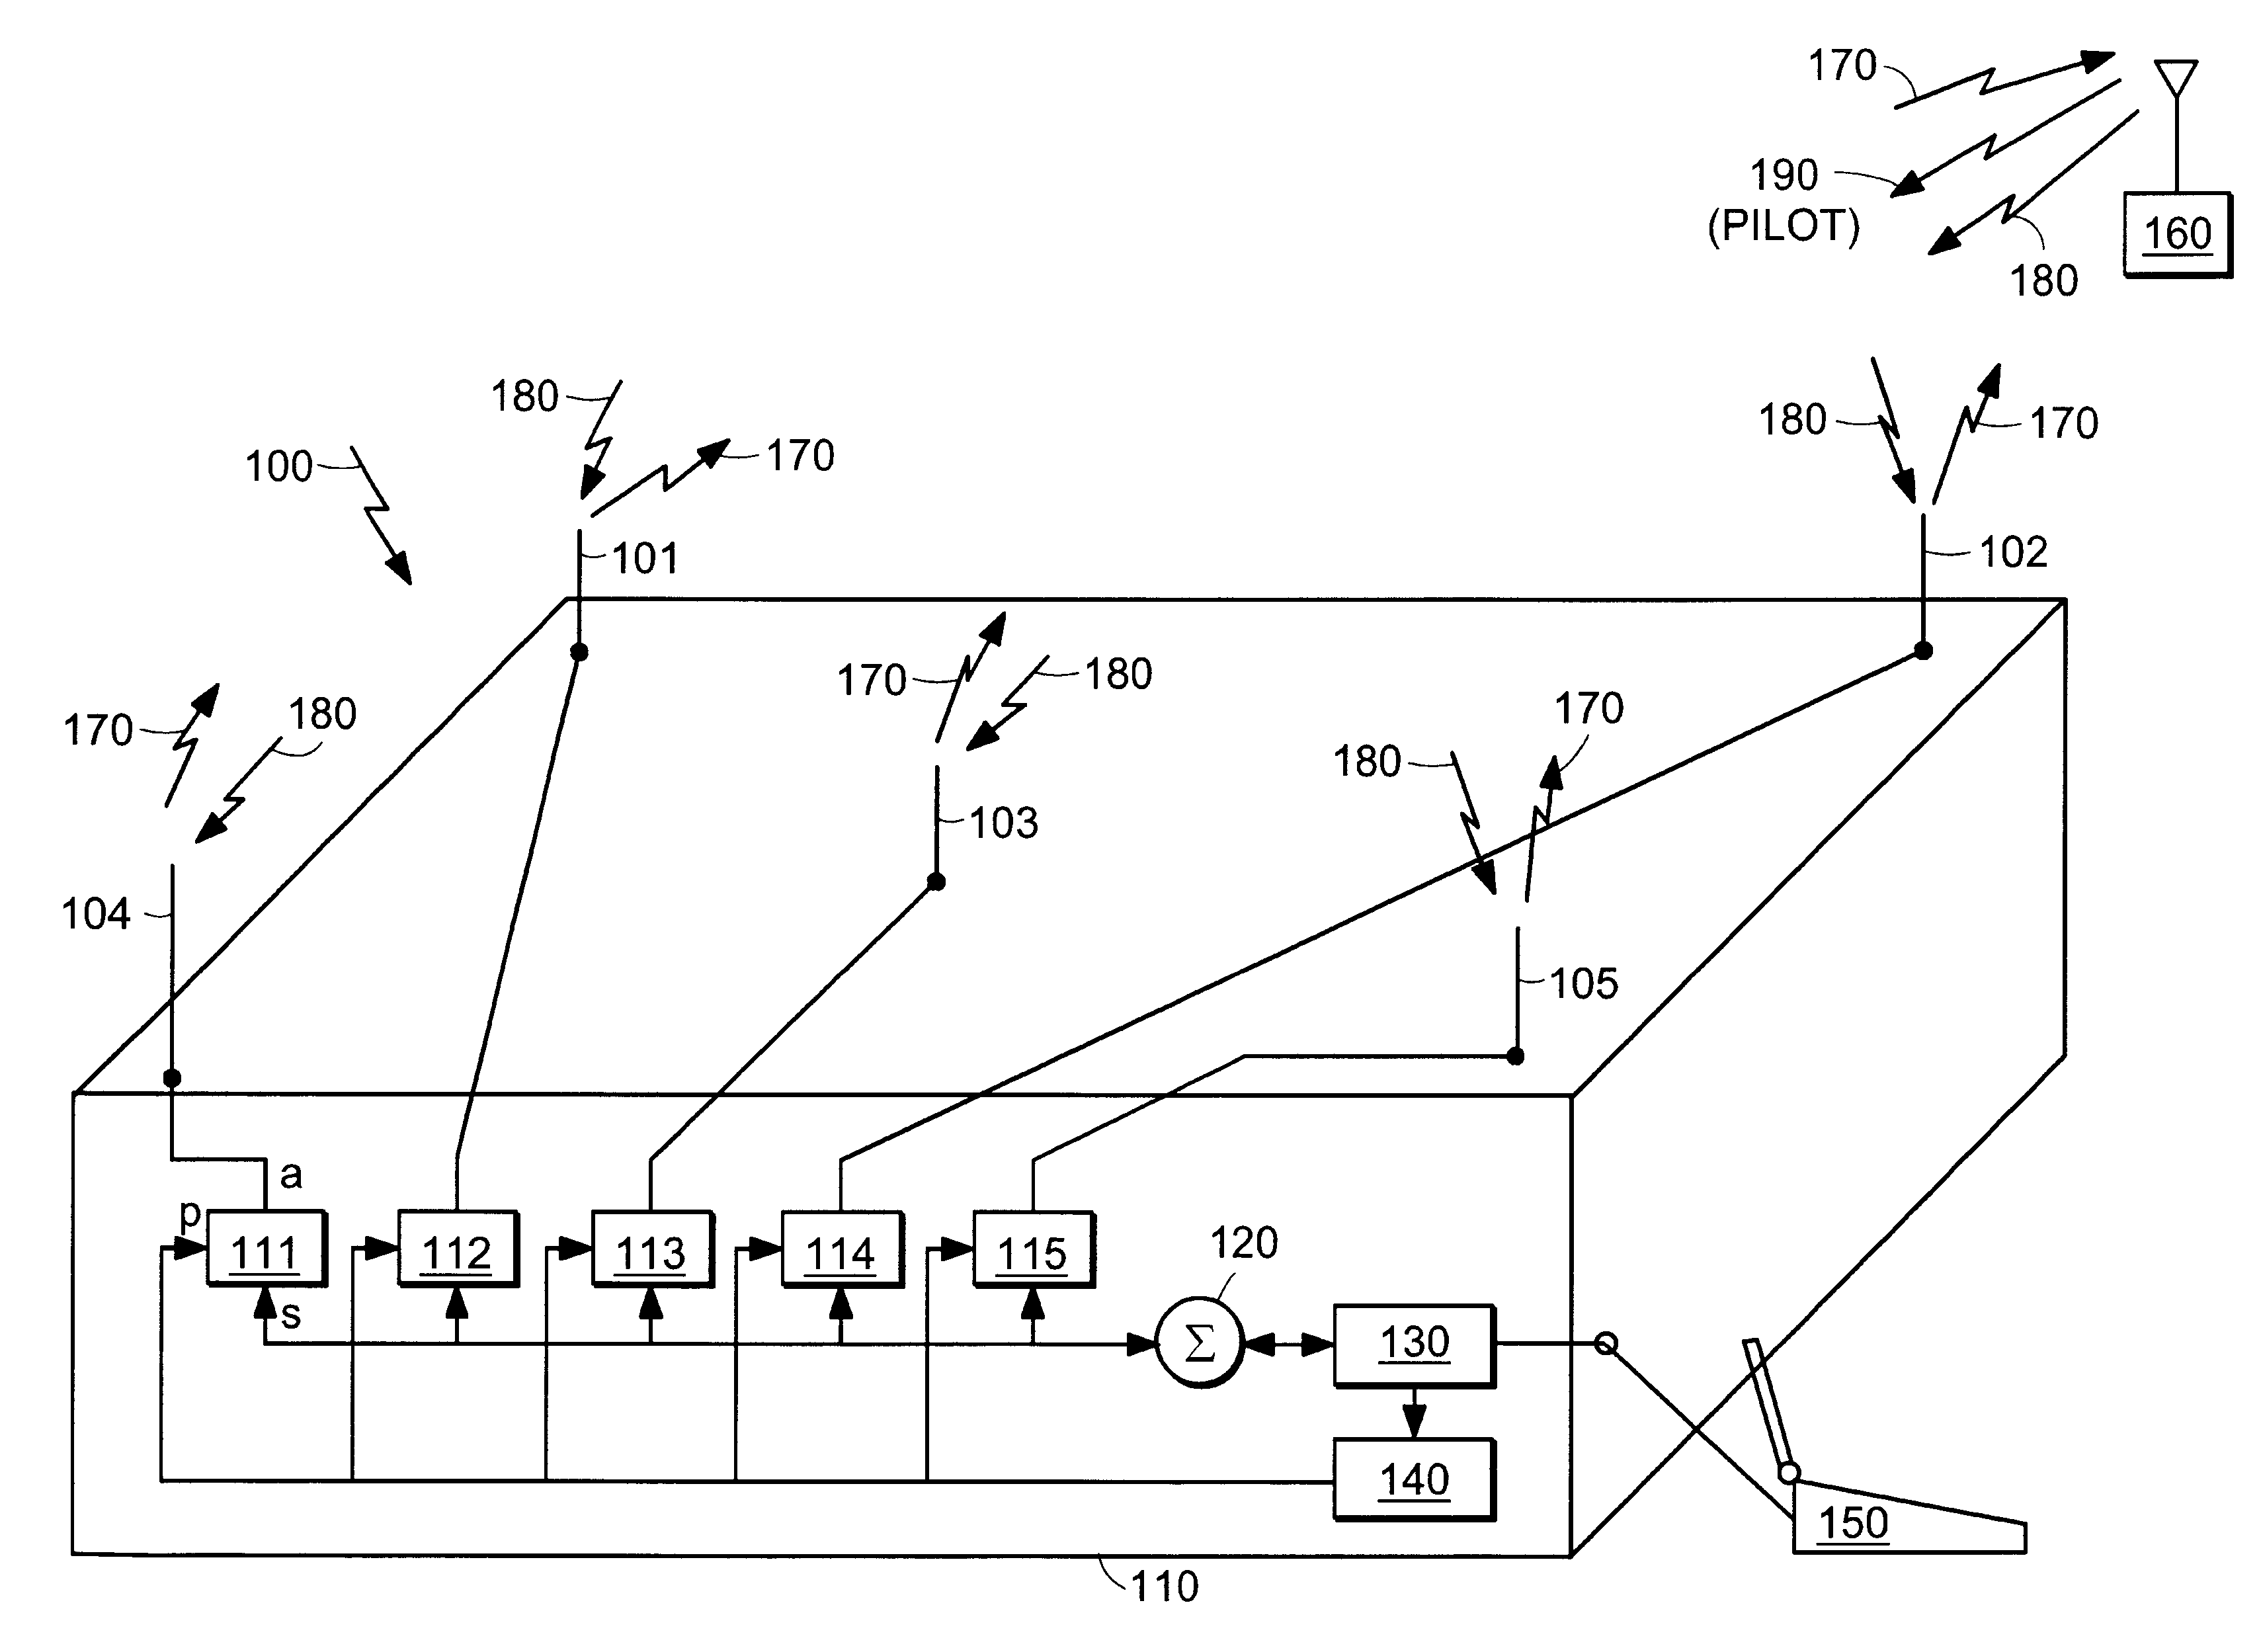 Adaptive antenna for use in same frequency networks